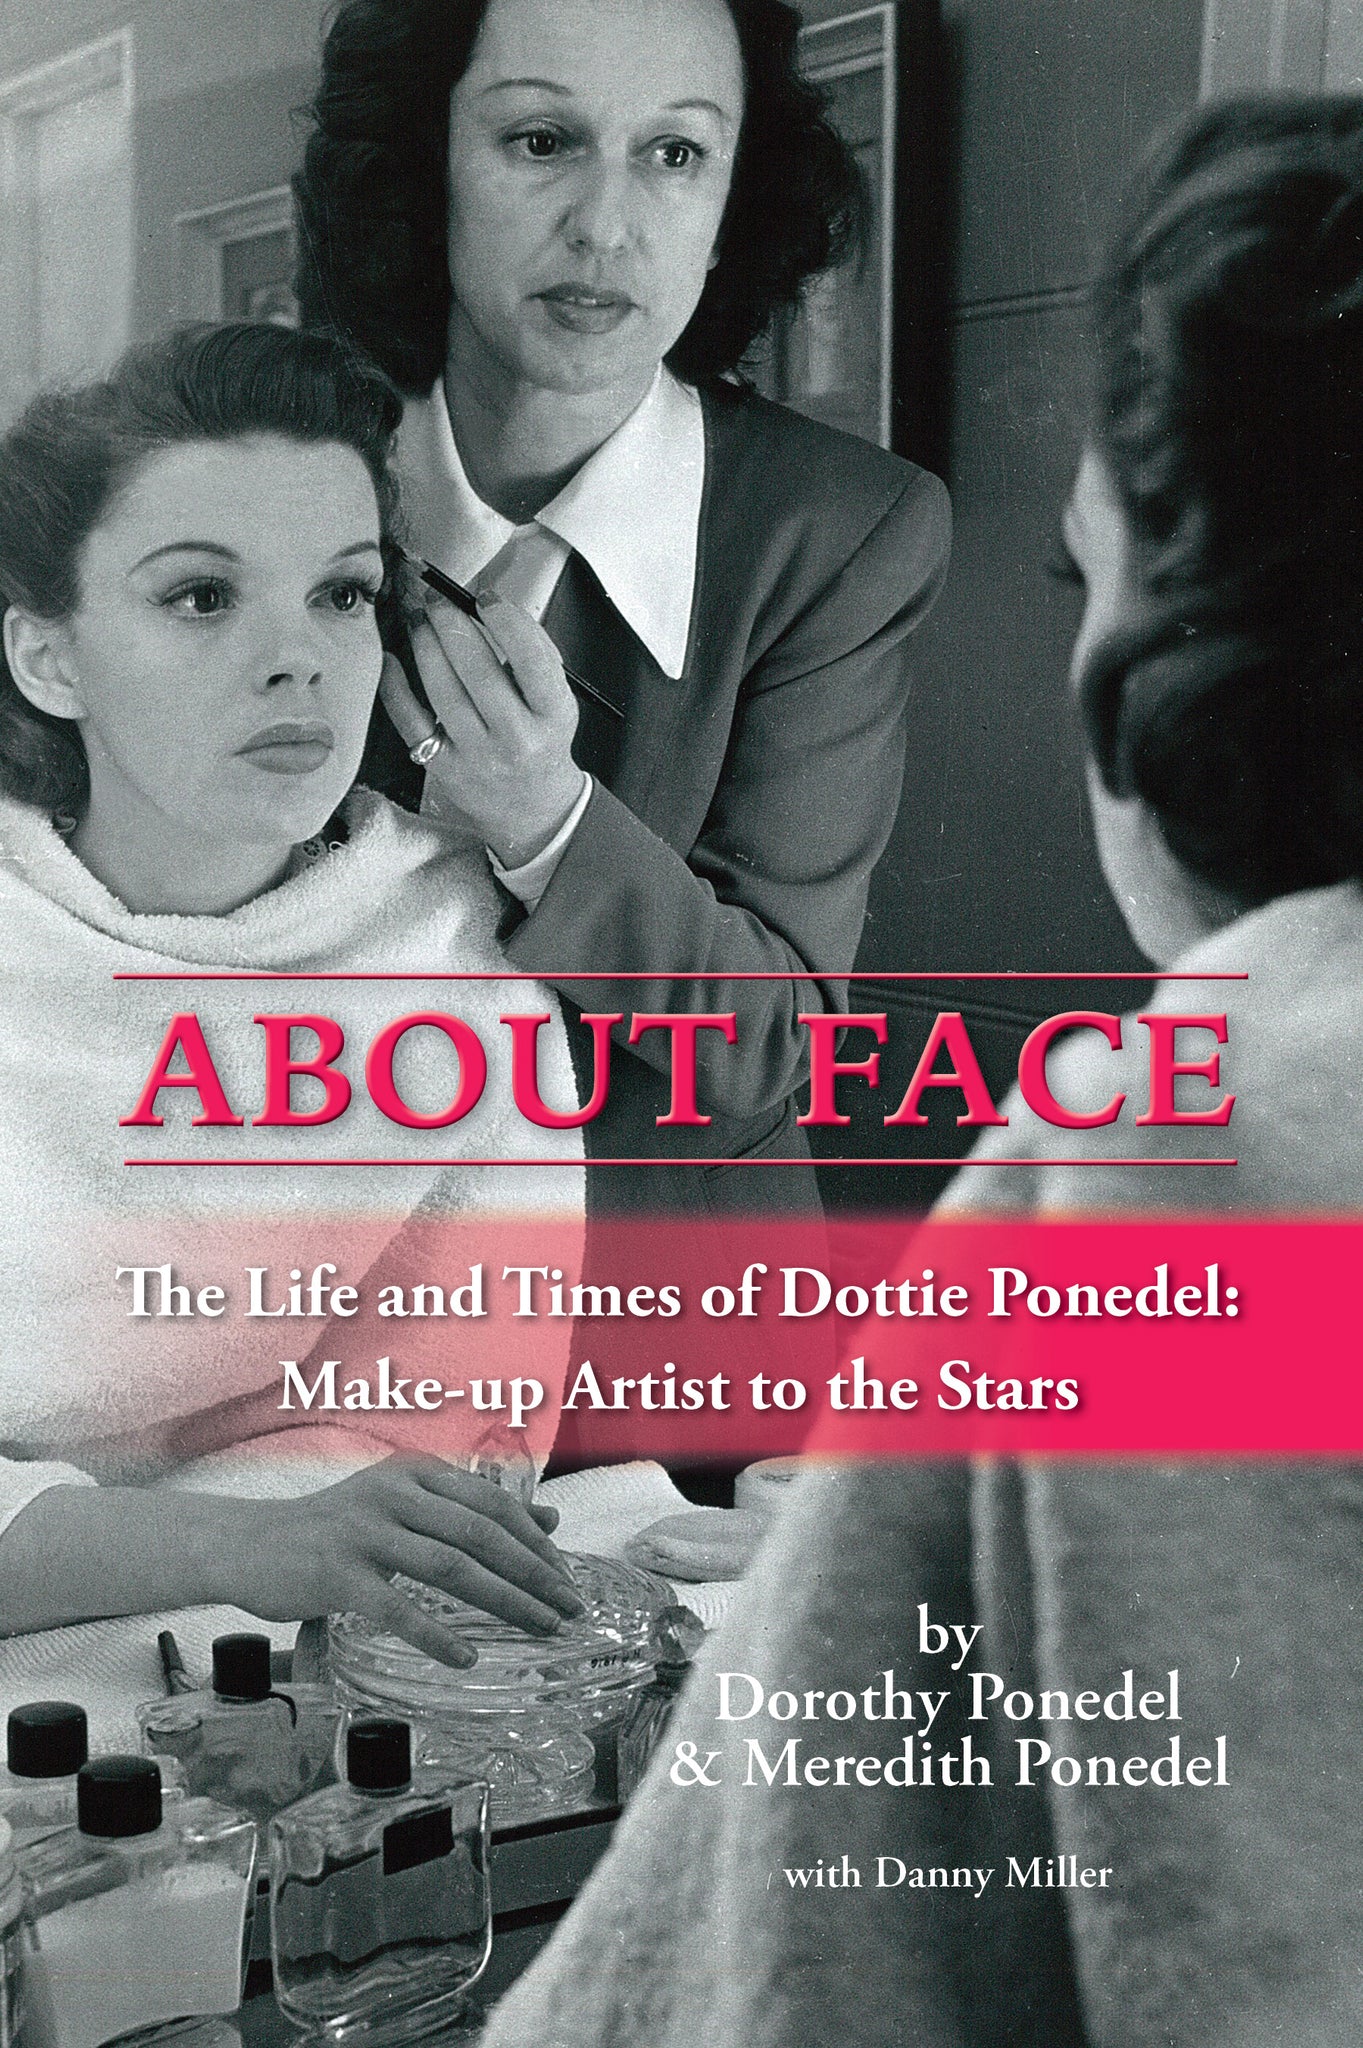 About Face: The Life and Times of Dottie Ponedel, Make-up Artist to the Stars (paperback) - BearManor Manor